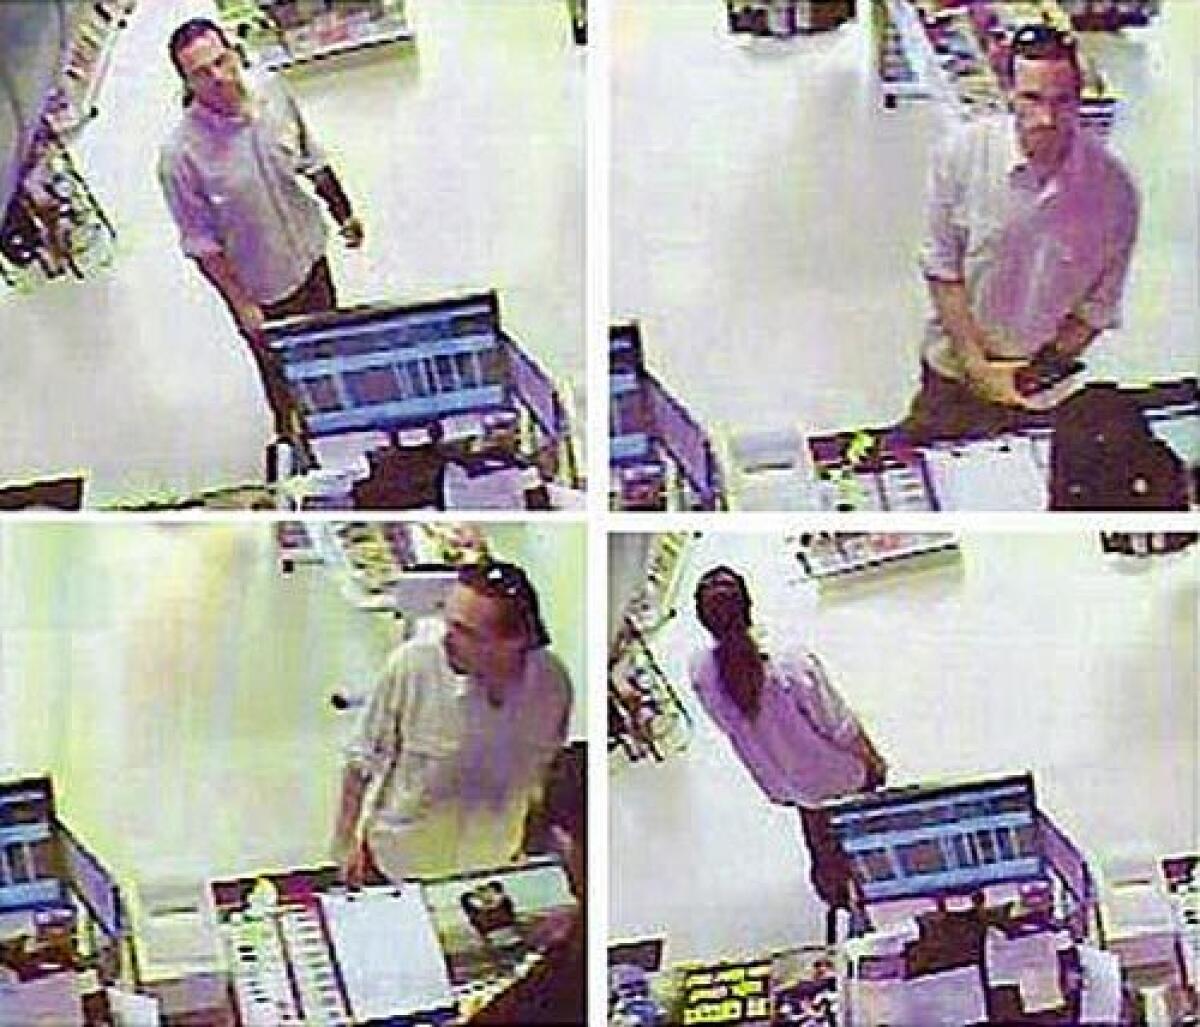 These undated images made from a surveillance video provided by the Longmont Colorado Police Department show a man claiming to be a police detective trying to get an adult novelty shop to give him free X-rated videos, saying he wanted to see if the performers were legally old enough according to police reports. Police are looking for him.